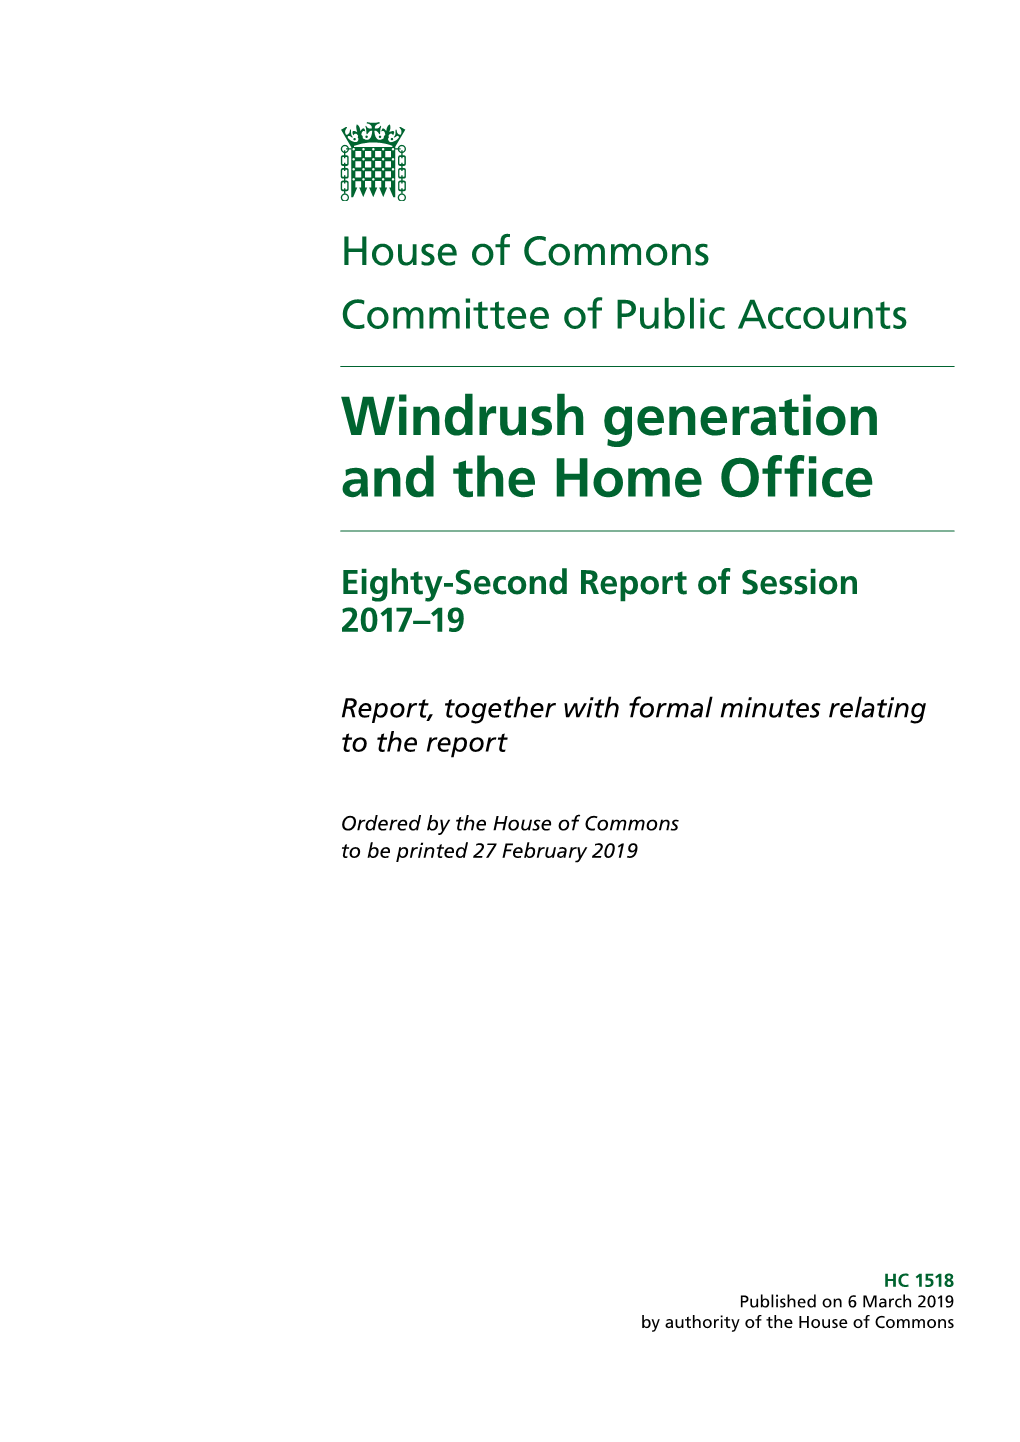 Windrush Generation and the Home Office